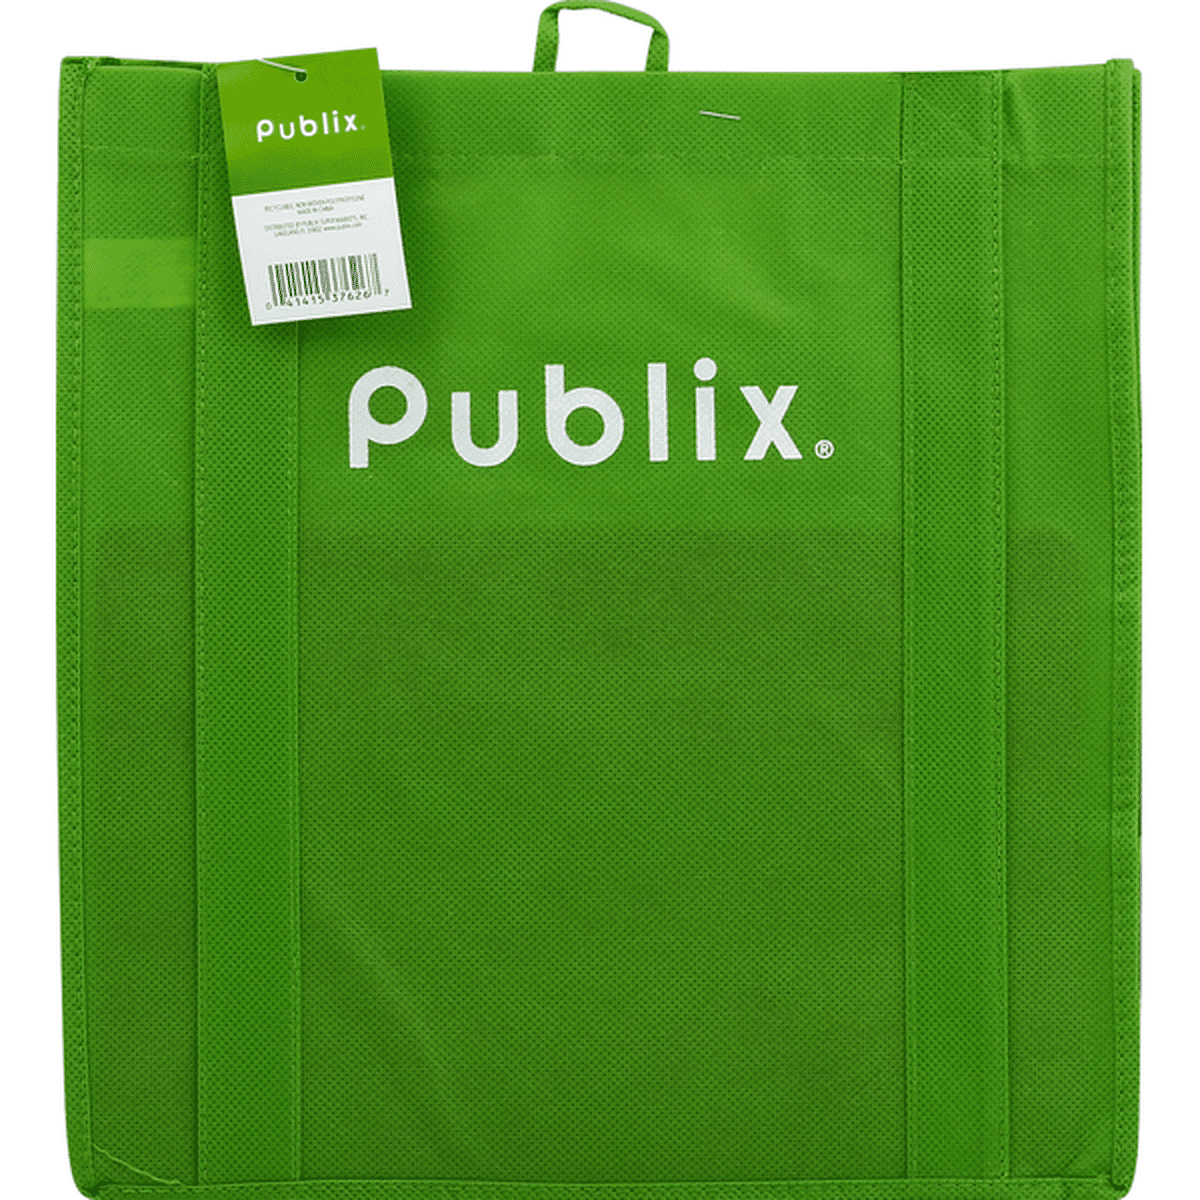 Publix Happy Easter reusable shopping bag, w/chicks/rabbits print, NWT for  Sale - Fleetwoodmac.net